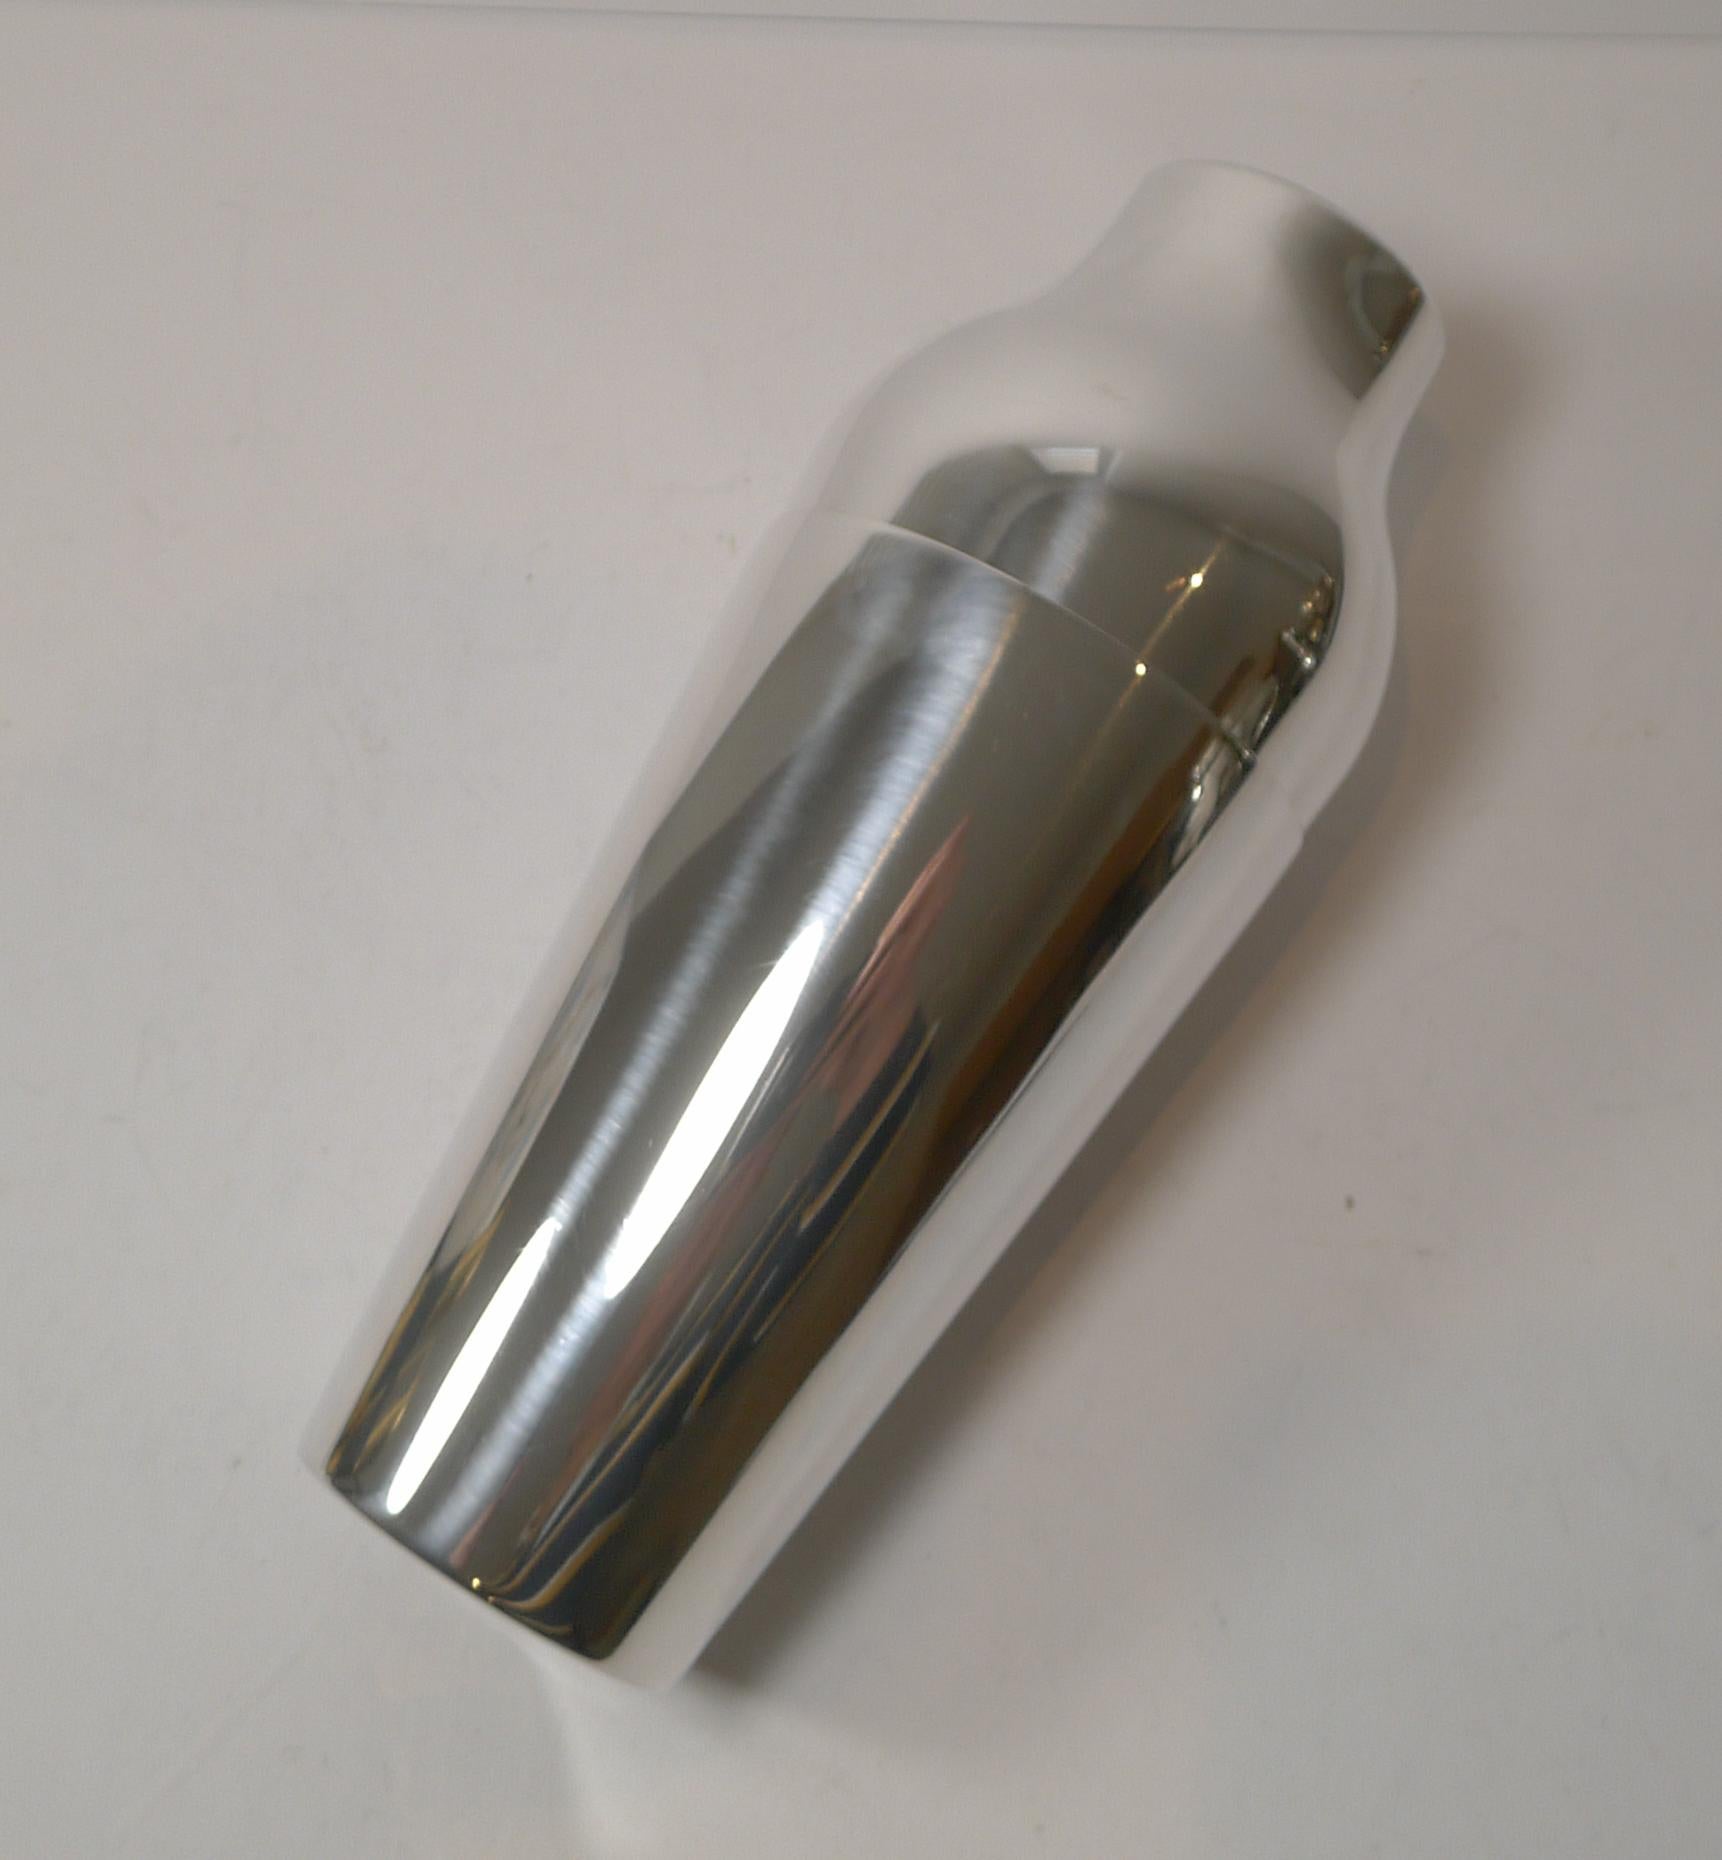 A smart Bauhaus style two-part cocktail shaker with it's sleek modernist design in silver plate.

Made by the top-notch Parisian silversmith, Christofle of Paris, signed on both pieces.

Dating to c.1960 it remains in superb condition having